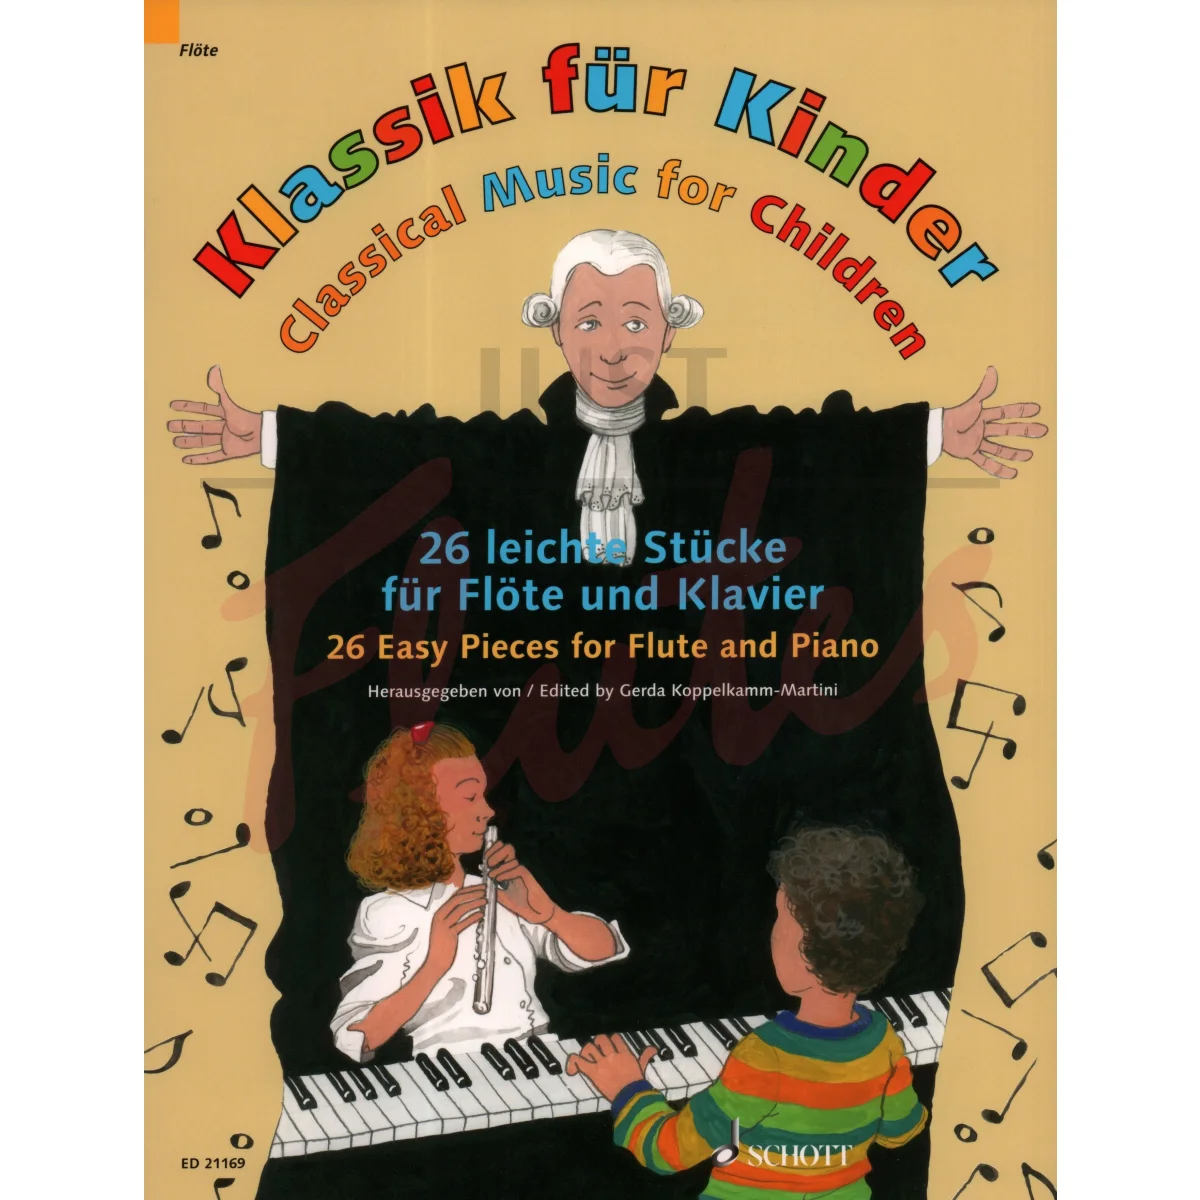 Classical Music for Children for Flute and Piano